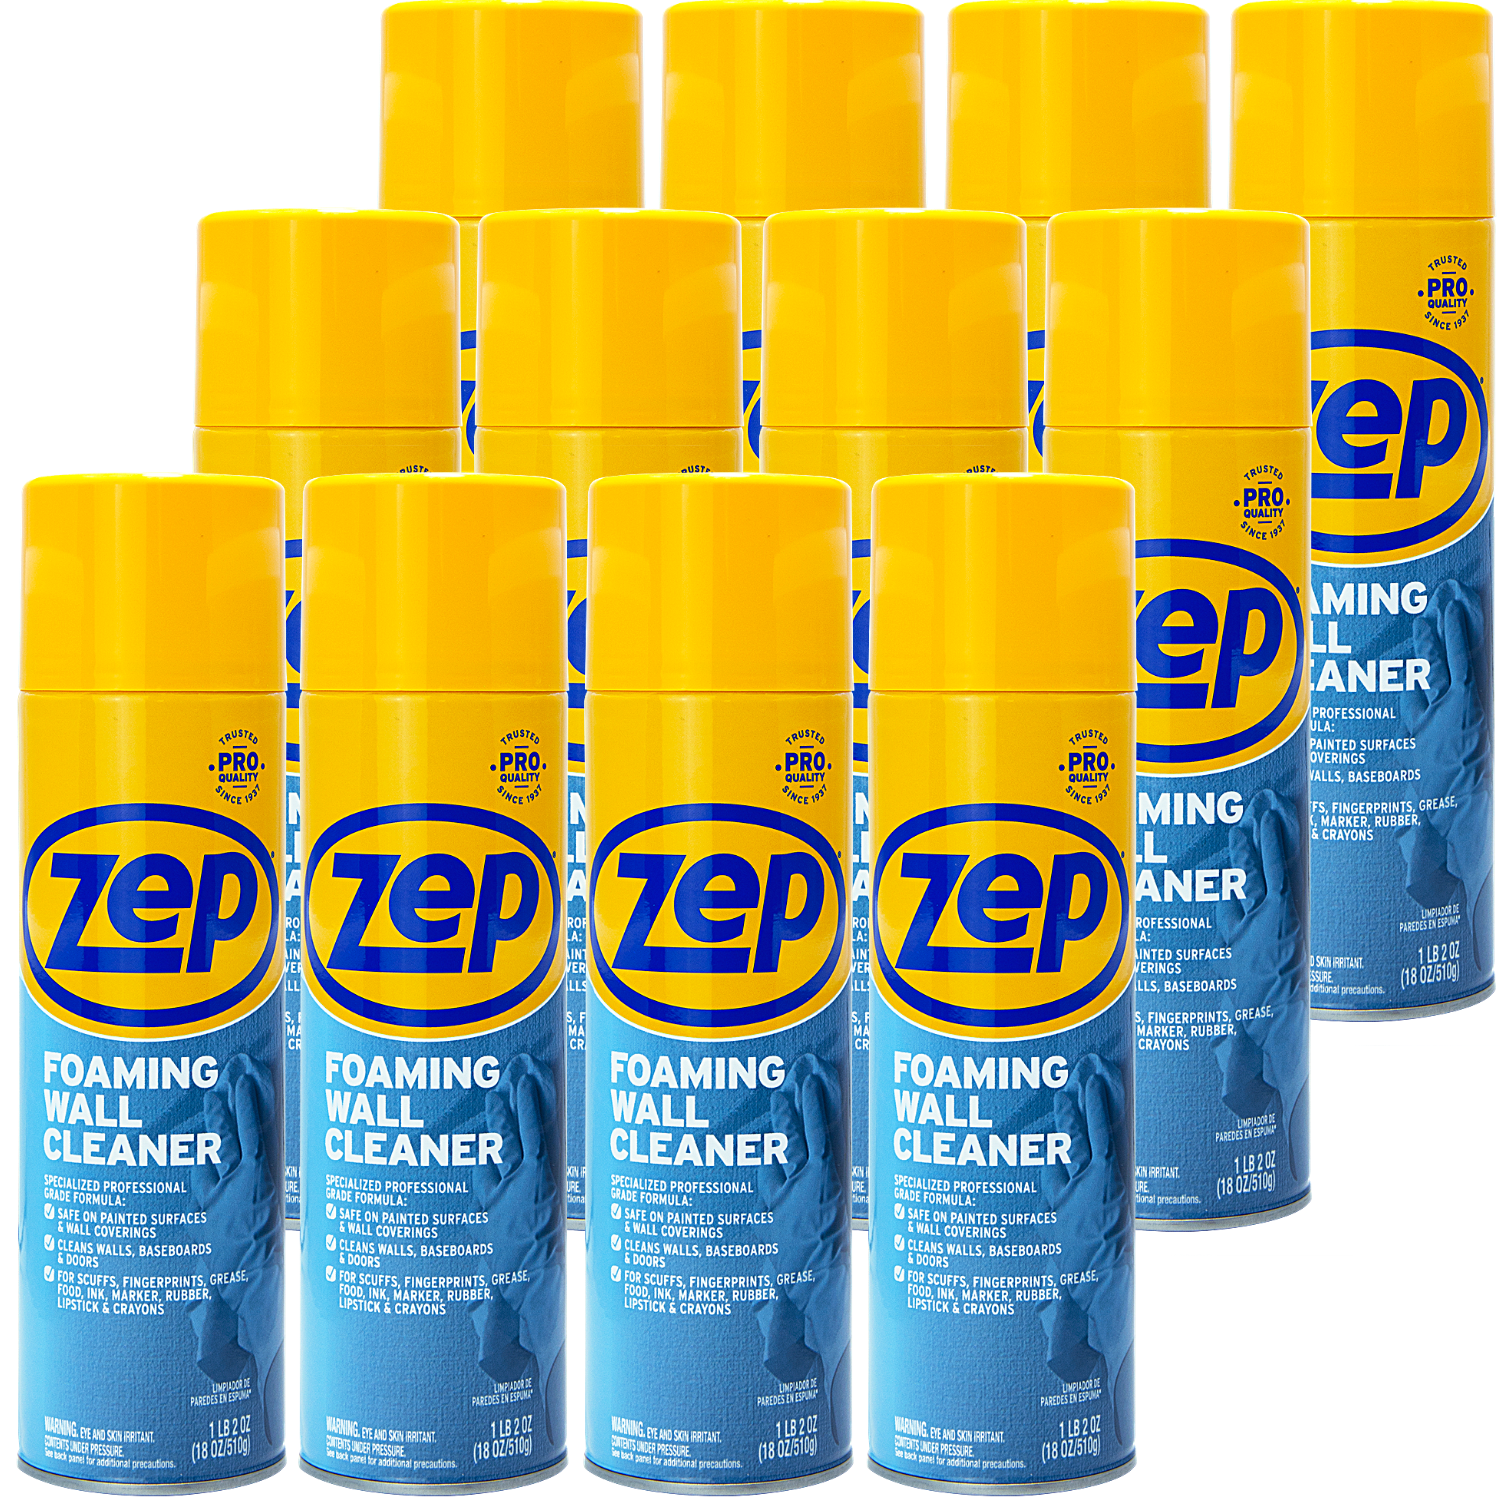 Zep Foaming Wall Cleaner FTW! #finds #fyp #zep #apartmenthacks #, Wall Cleaning Hacks